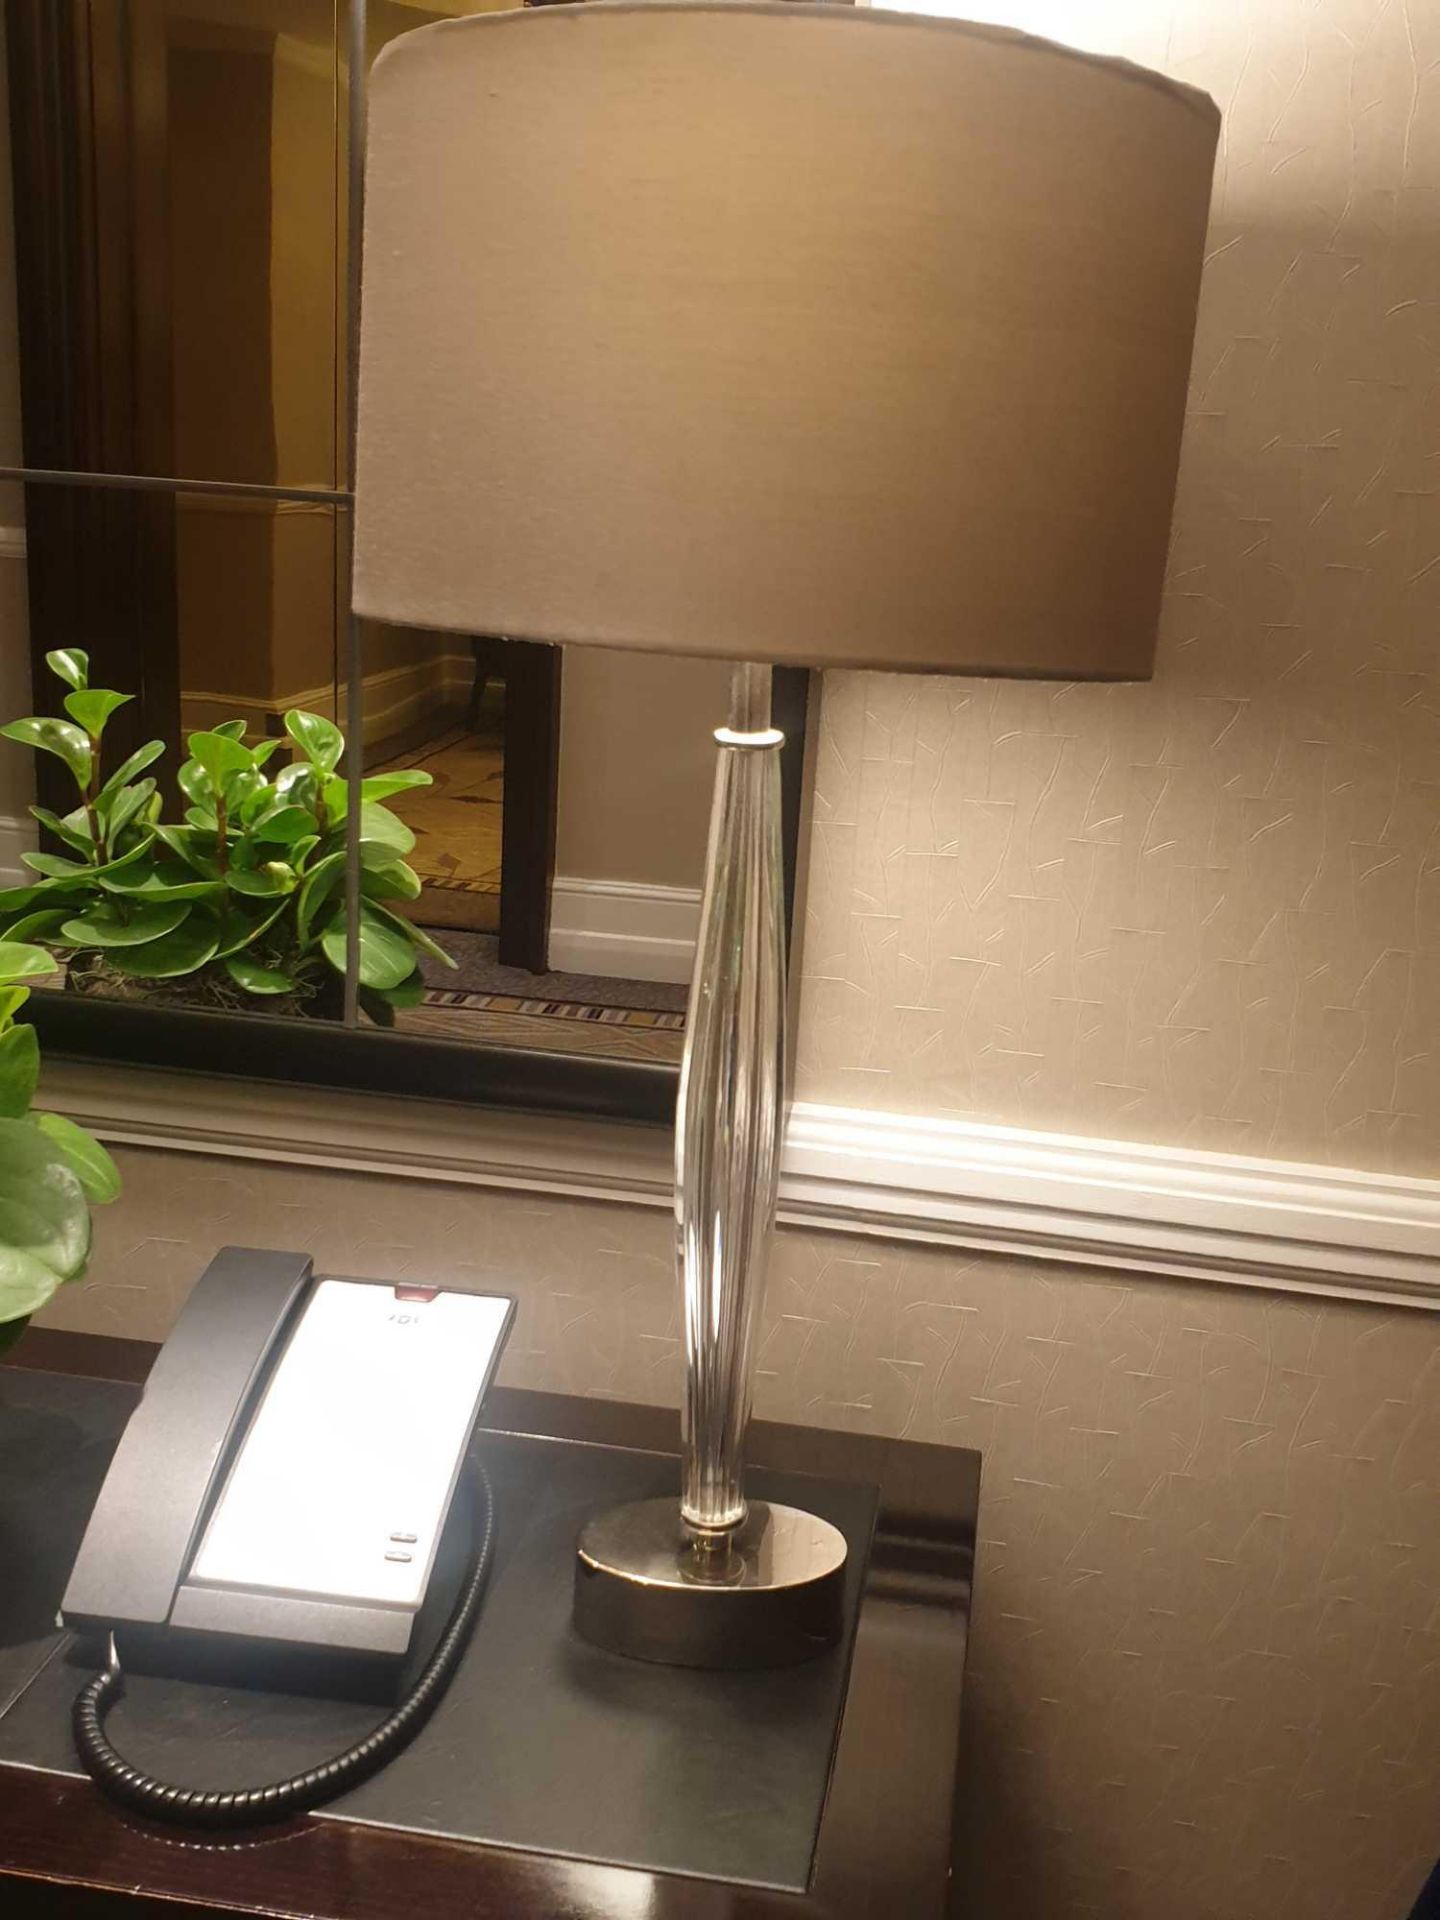 A Pair Of Glass Stem Table Lamps With Chrome Base 32x 65cm ( Loc 7th Floor Lobby)